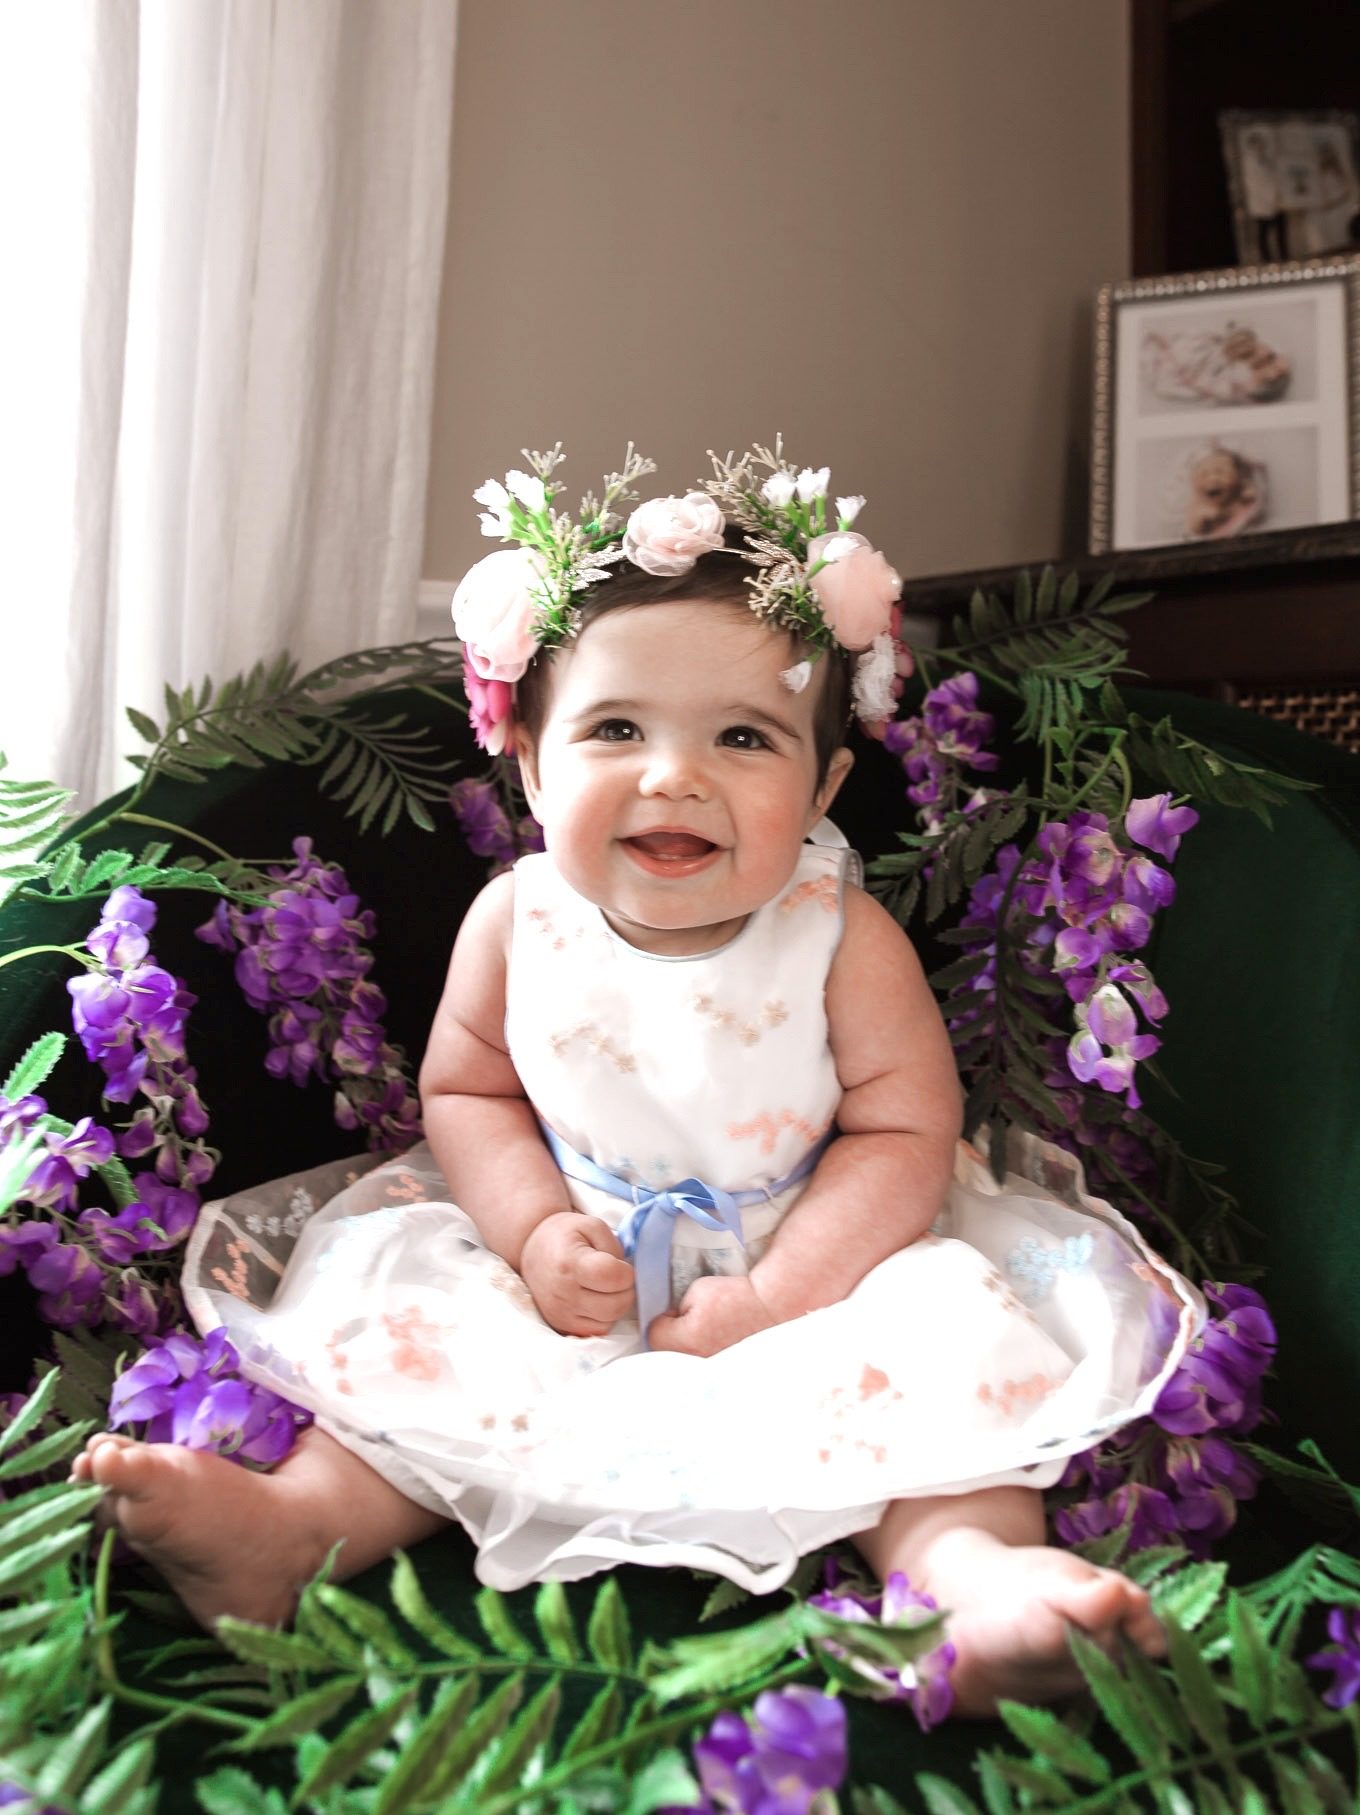 First Birthday by popular Chicago motherhood blog, Glass of Glam: image of a 9 month old baby girl wearing a white floral dress, flower crown and sitting in a wisteria garland.